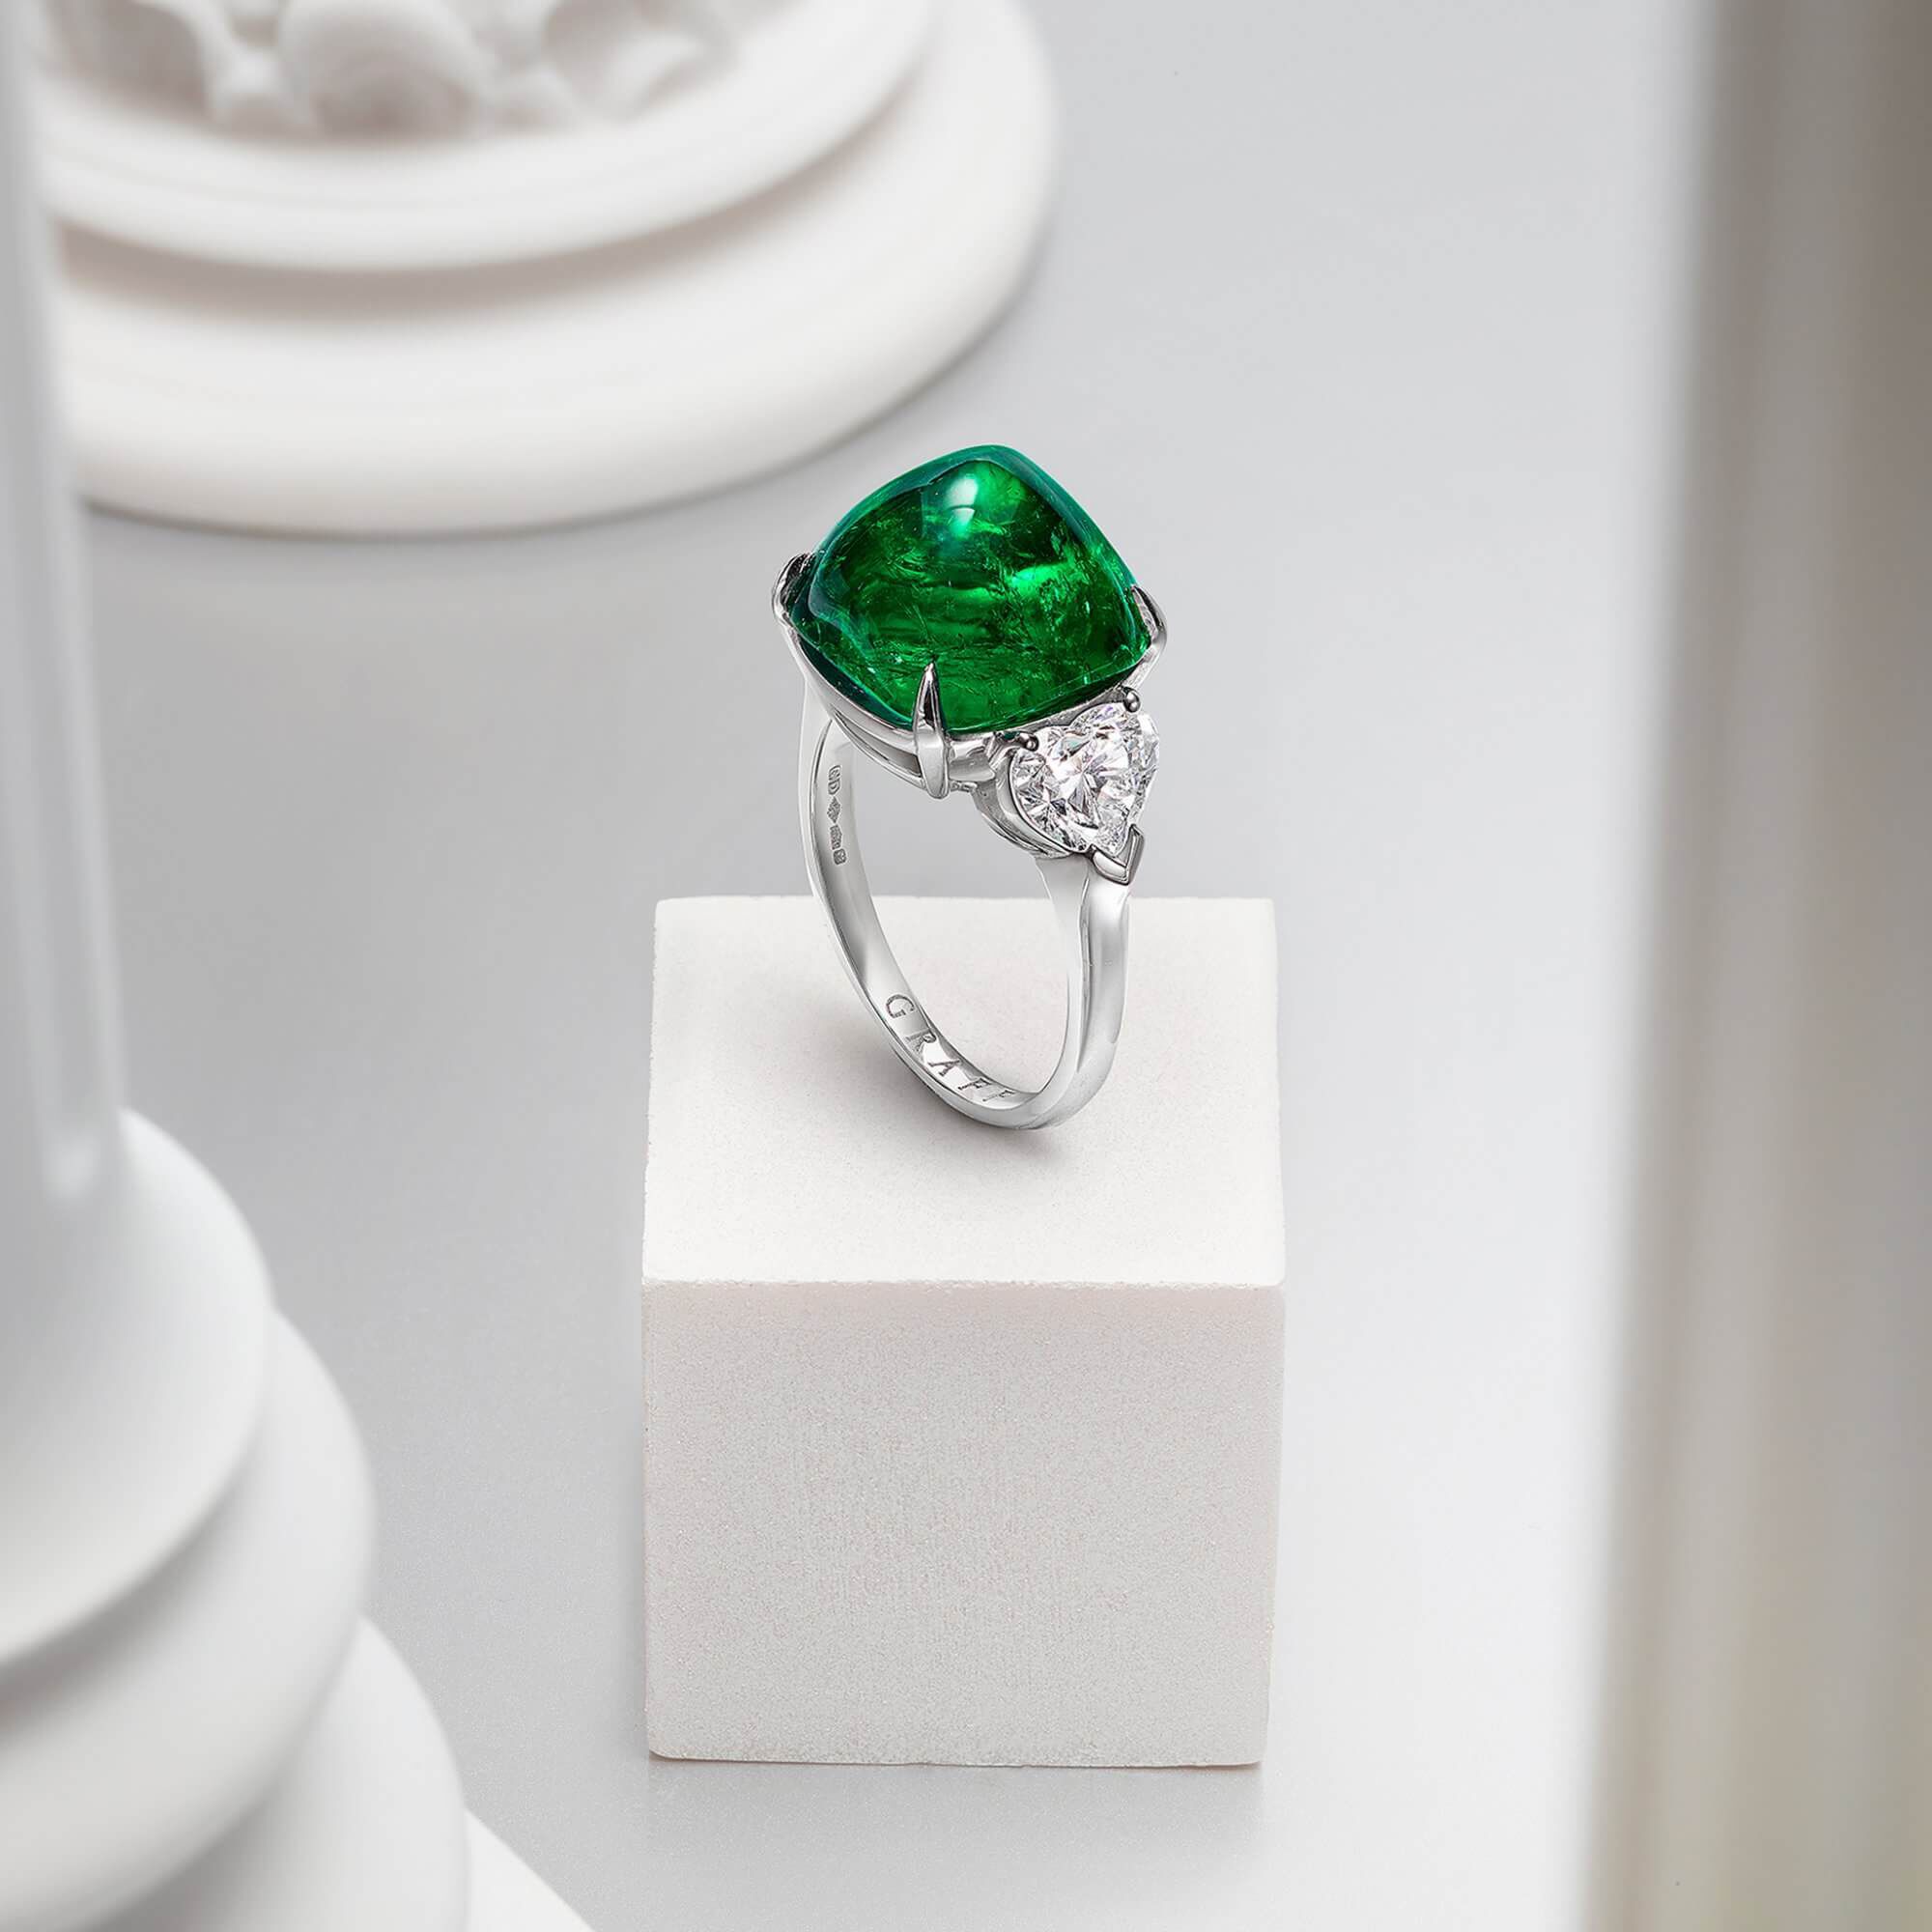 Graff Cabochon Emerald Promise High Jewellery Ring With White Heart Shape Diamond Shoulders inside a Gallery.